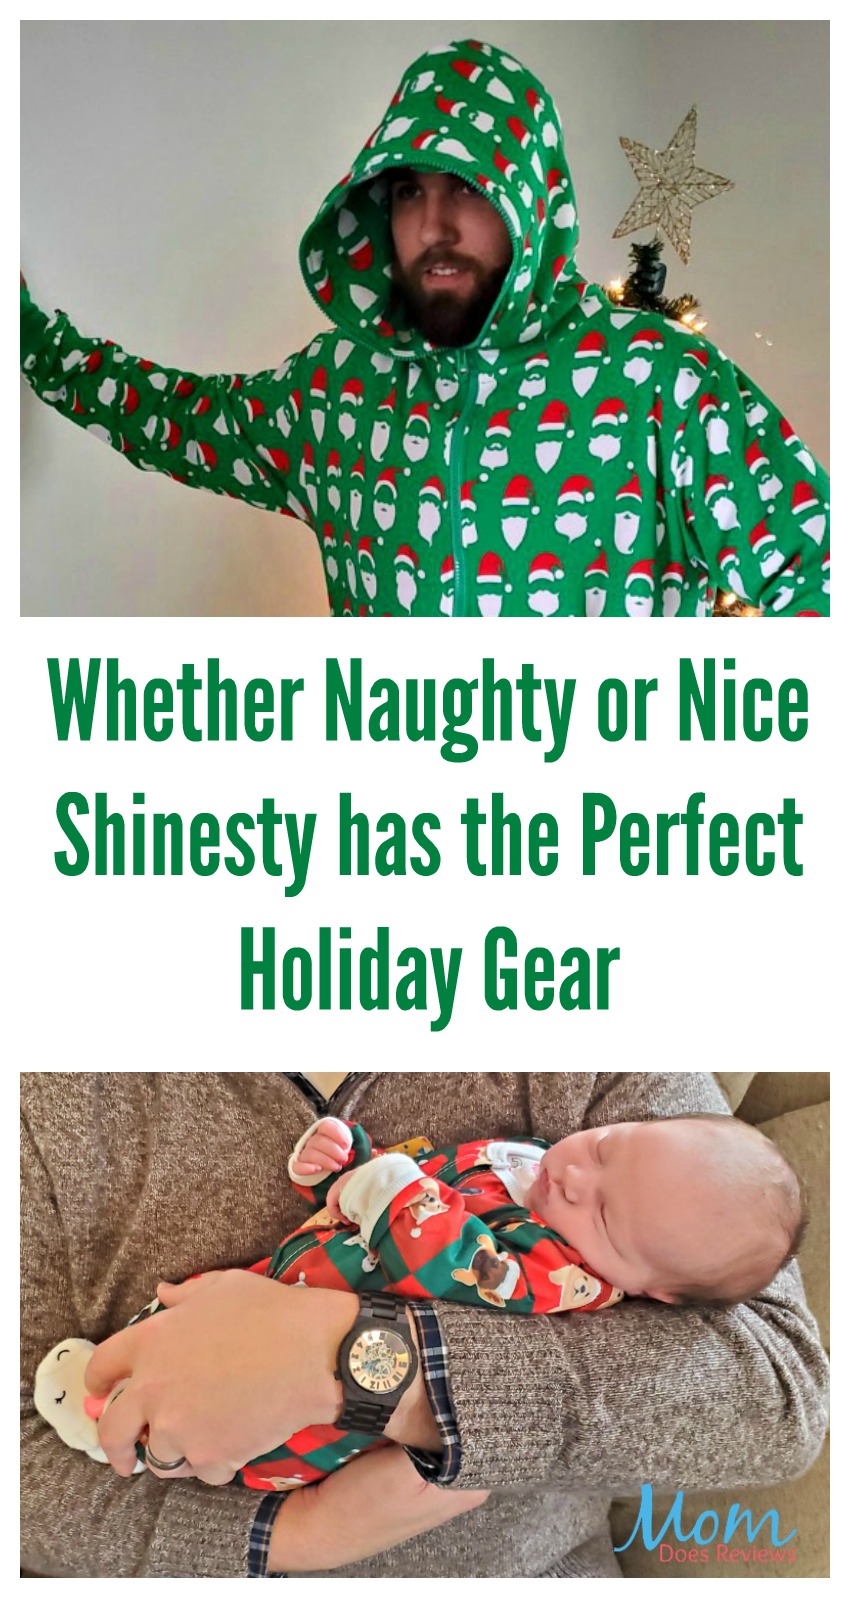 Shinesty has the Perfect Holiday Gear